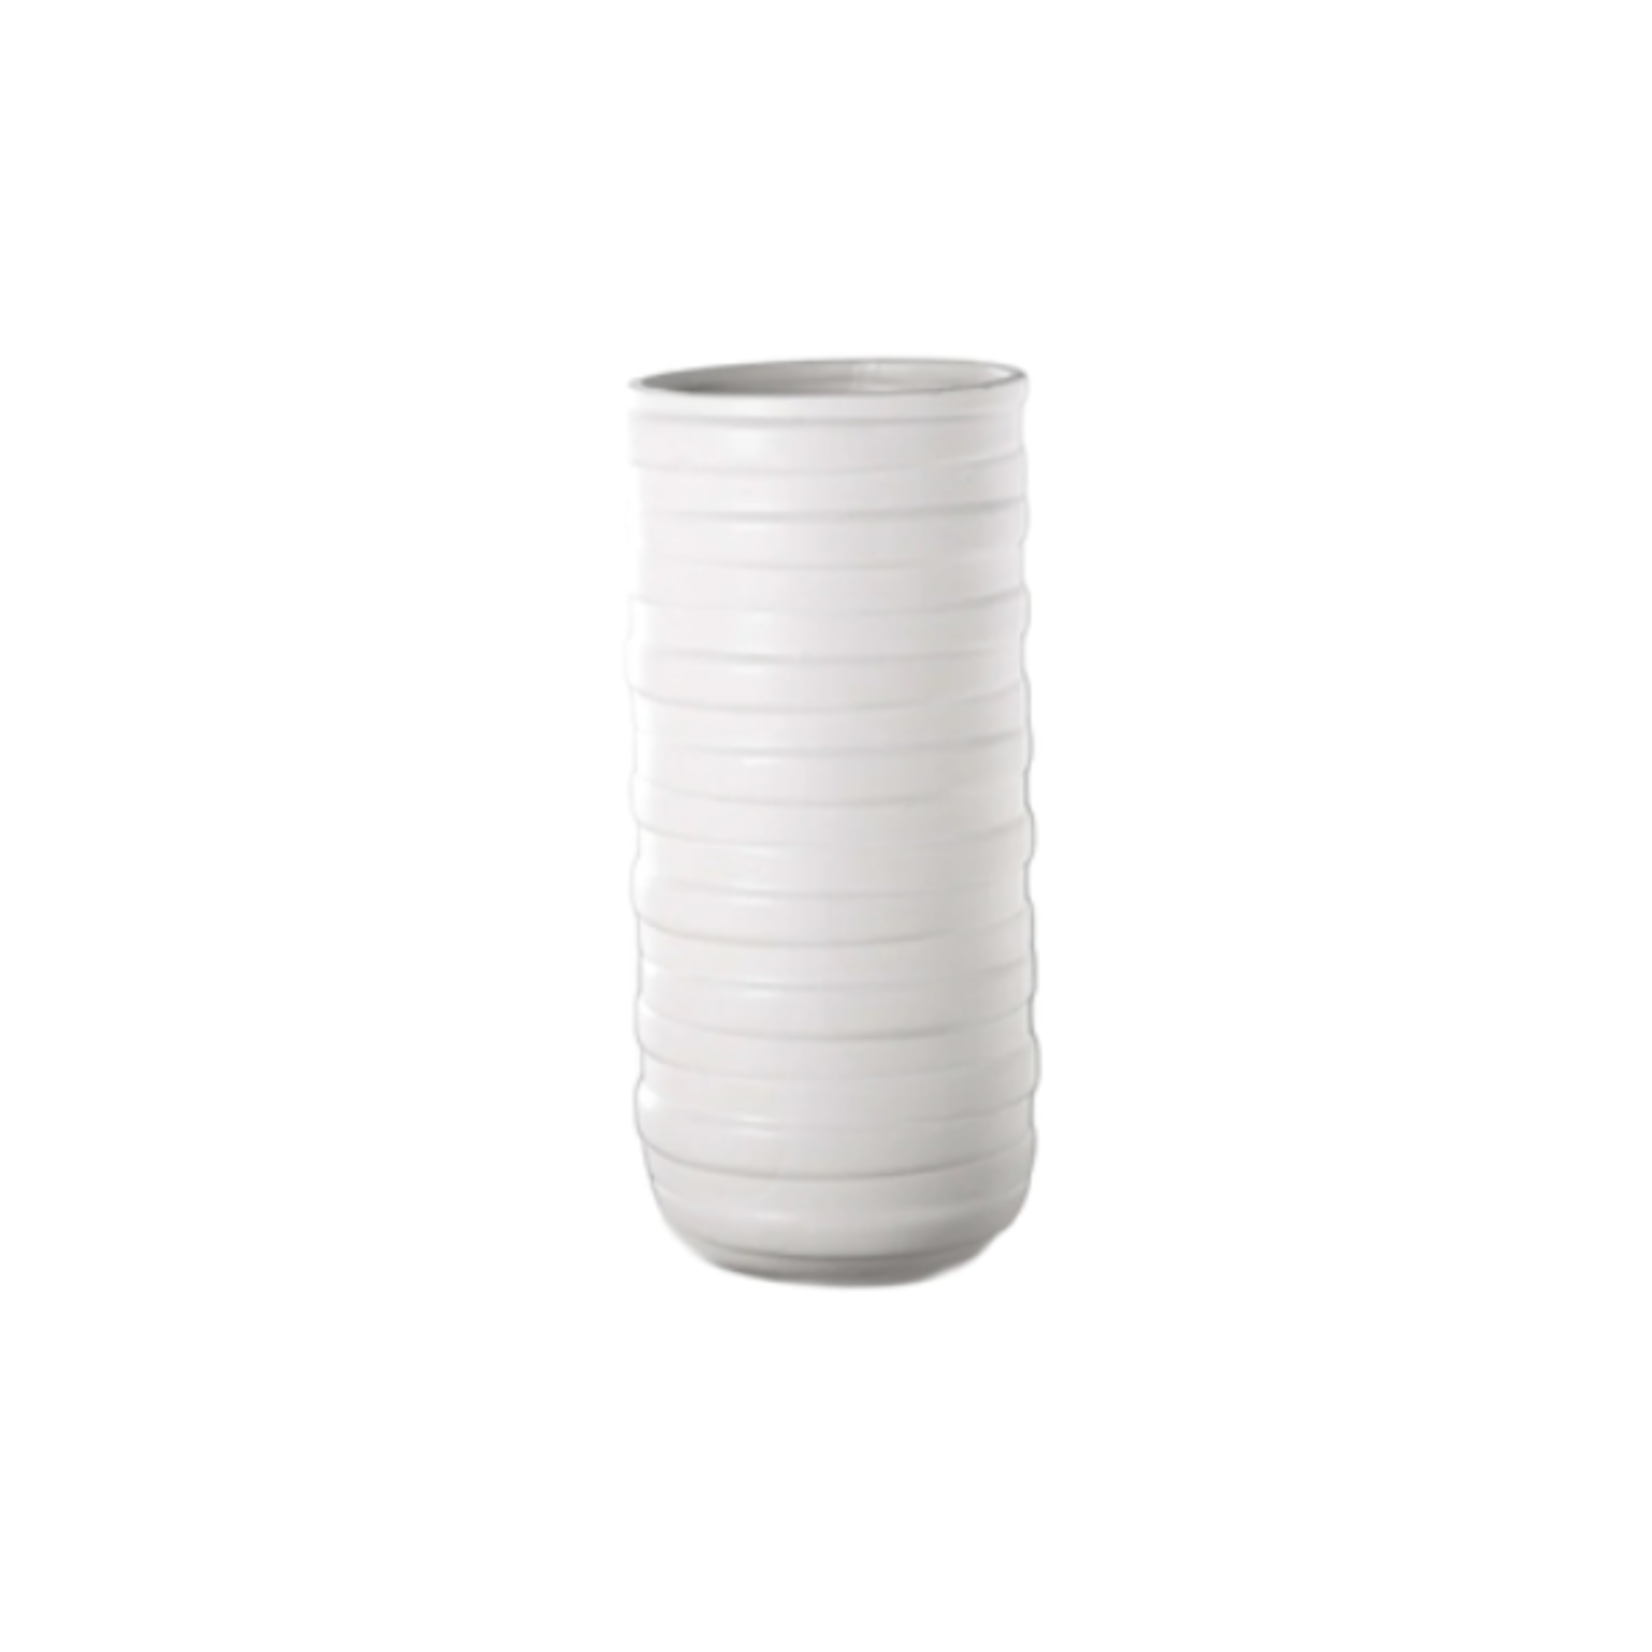 12.75”H X 5.75” SMALL MATTE WHITE CERAMIC CYLINDER EMBOSSED BANDED